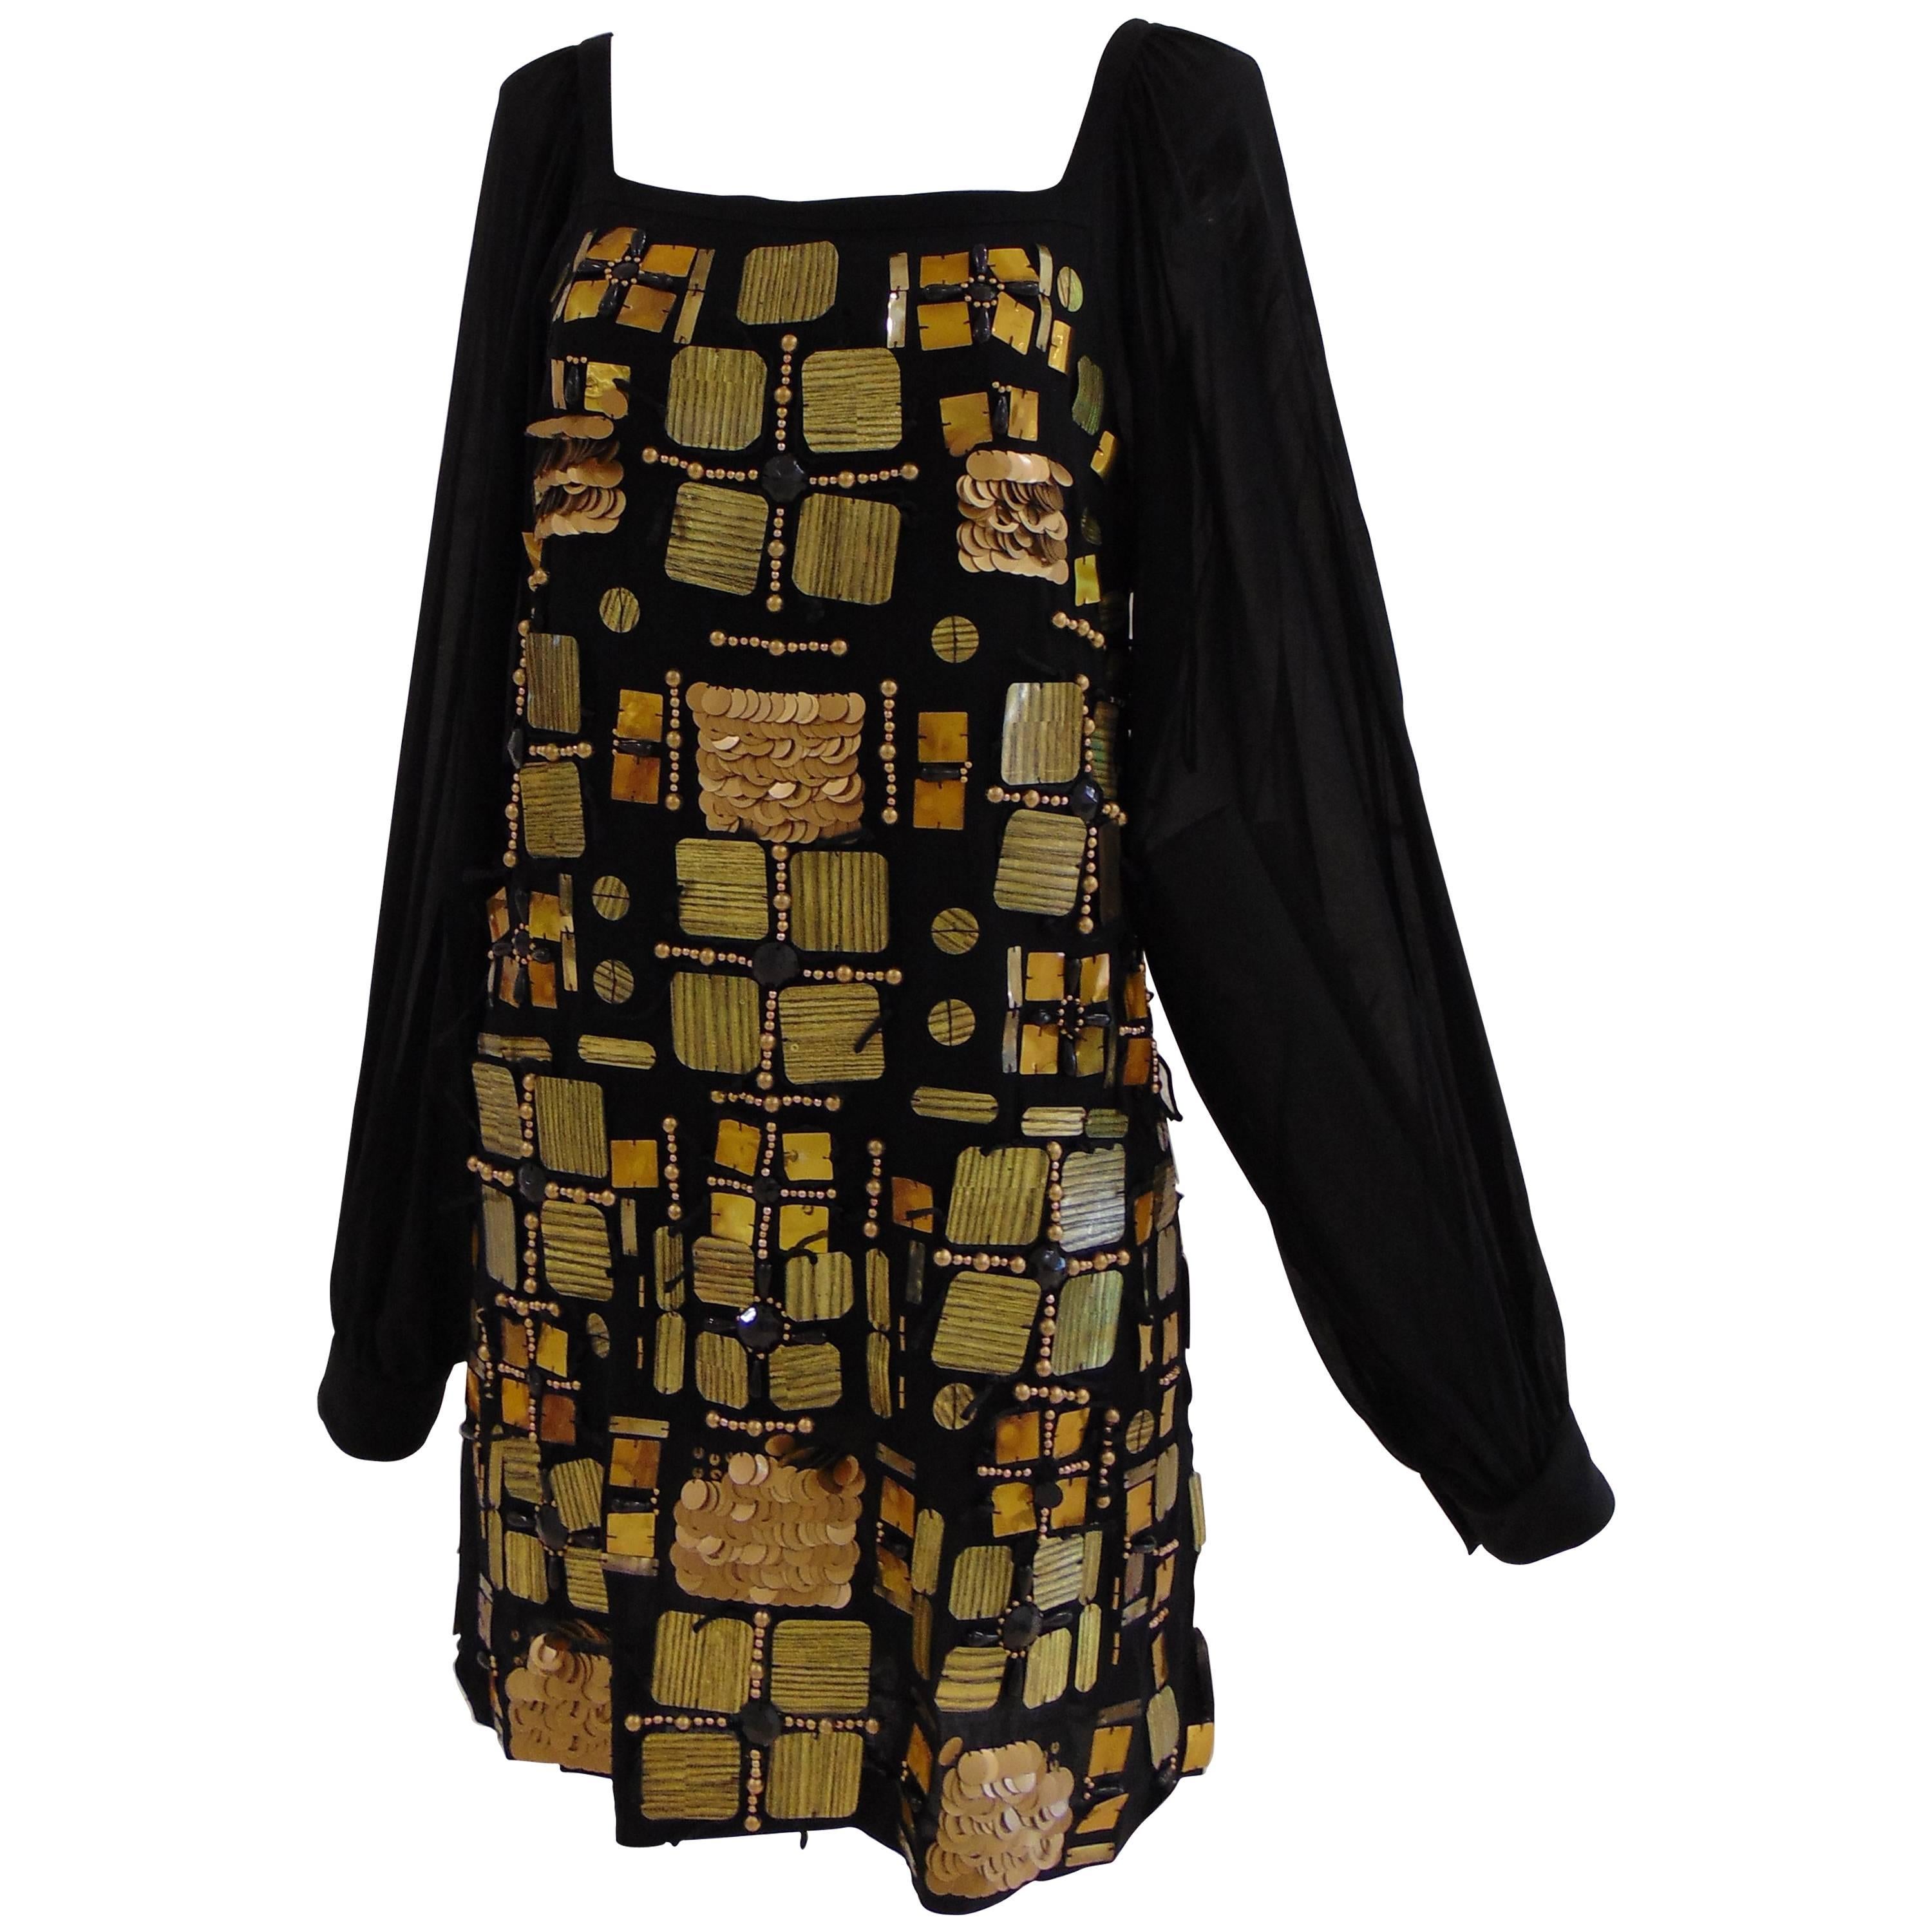 Emilio Pucci black silk dress with gold tone and black sequines